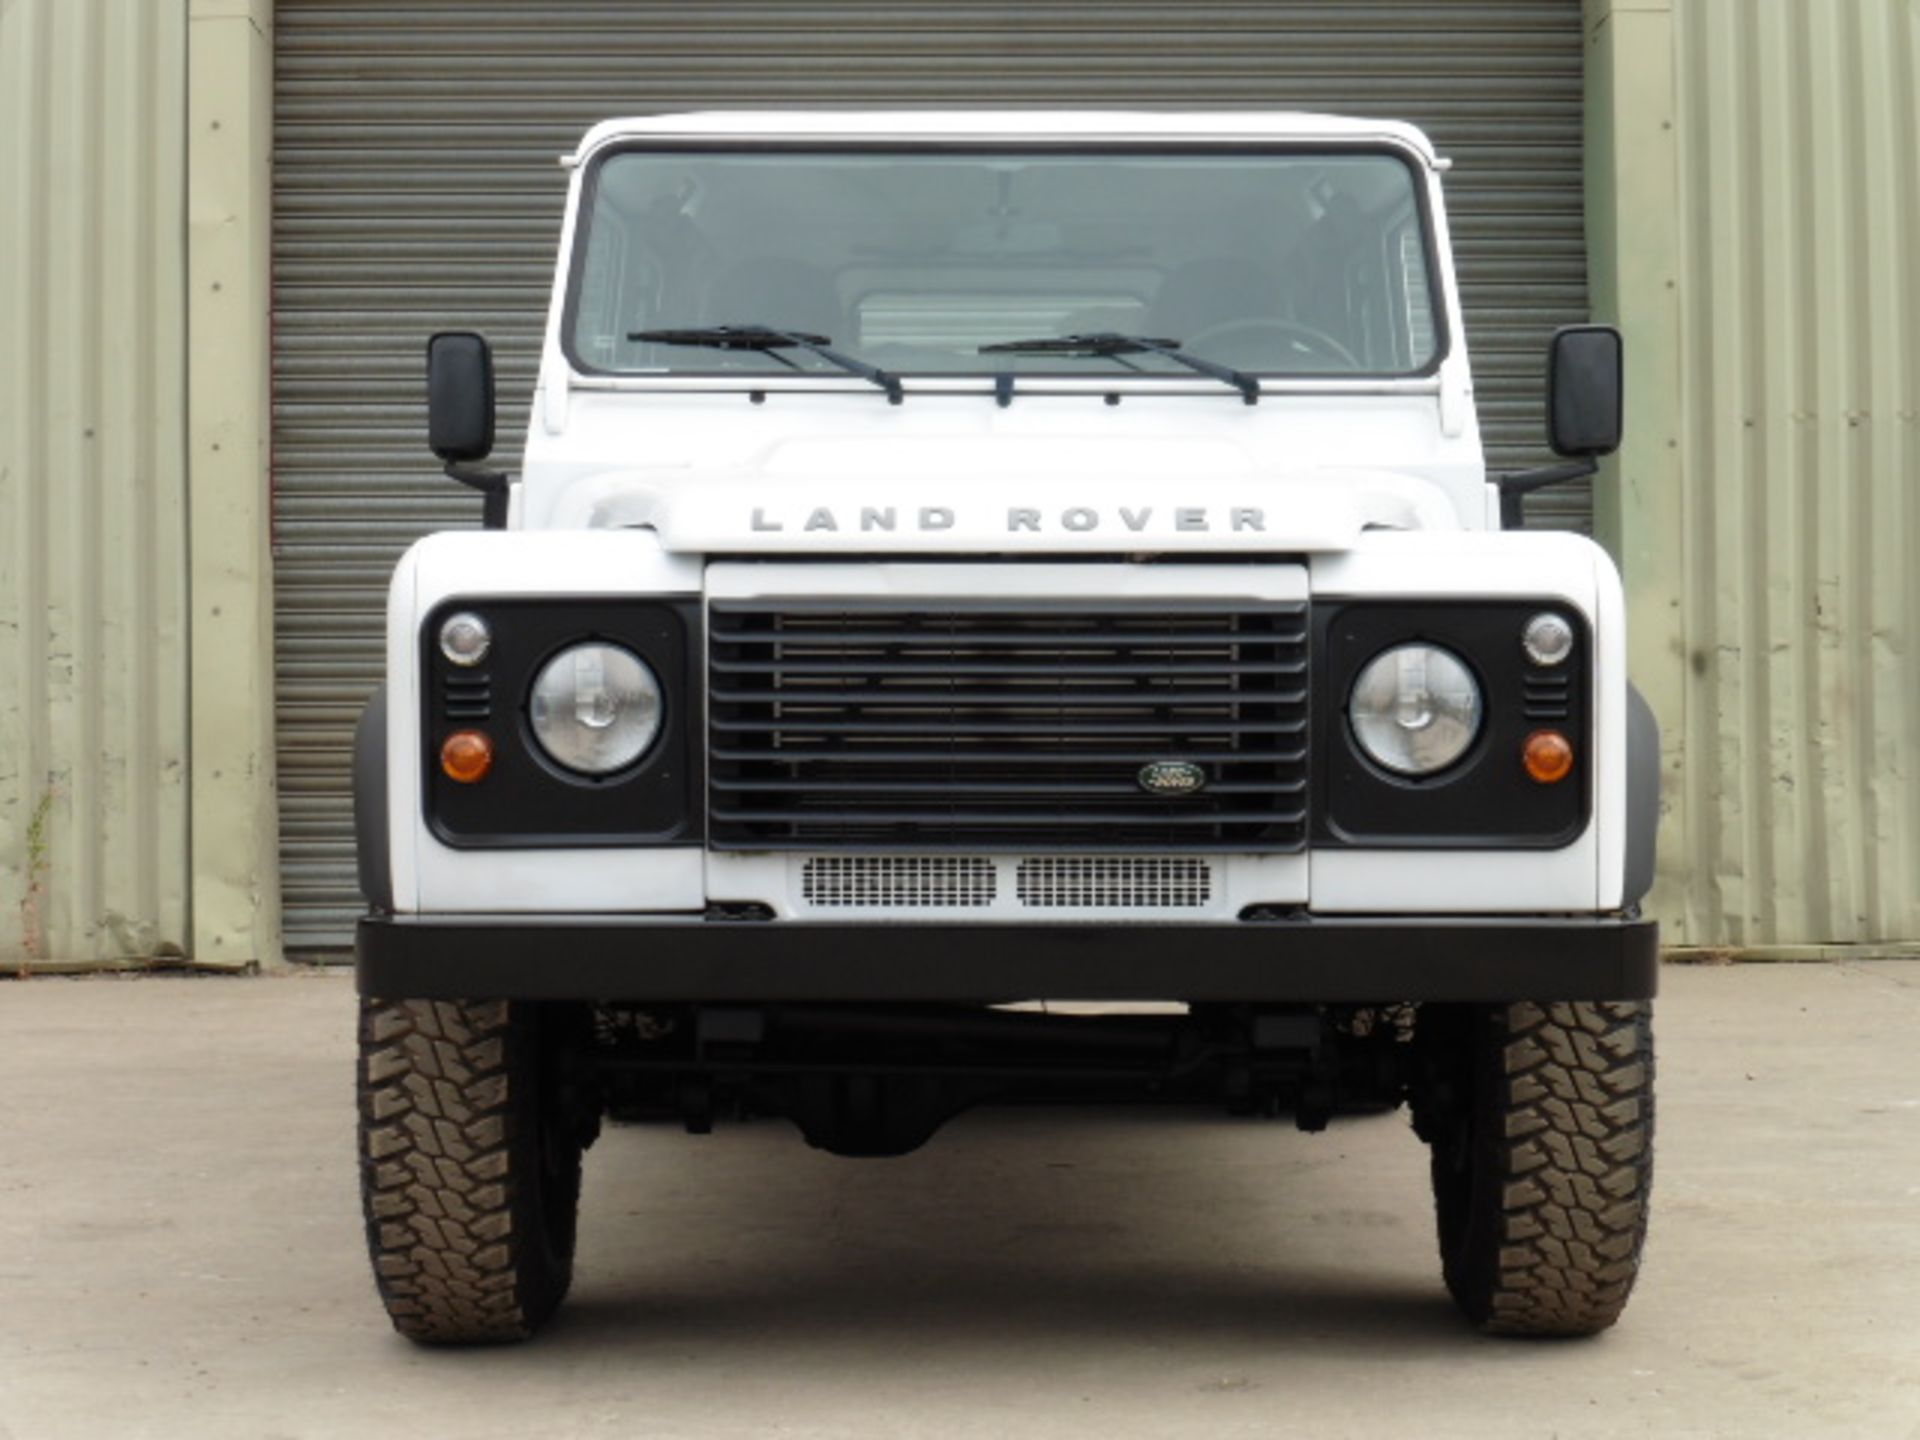 Delivery Mileage 2013 model year Land Rover Defender 110 5 door station wagon LHD - Image 2 of 20